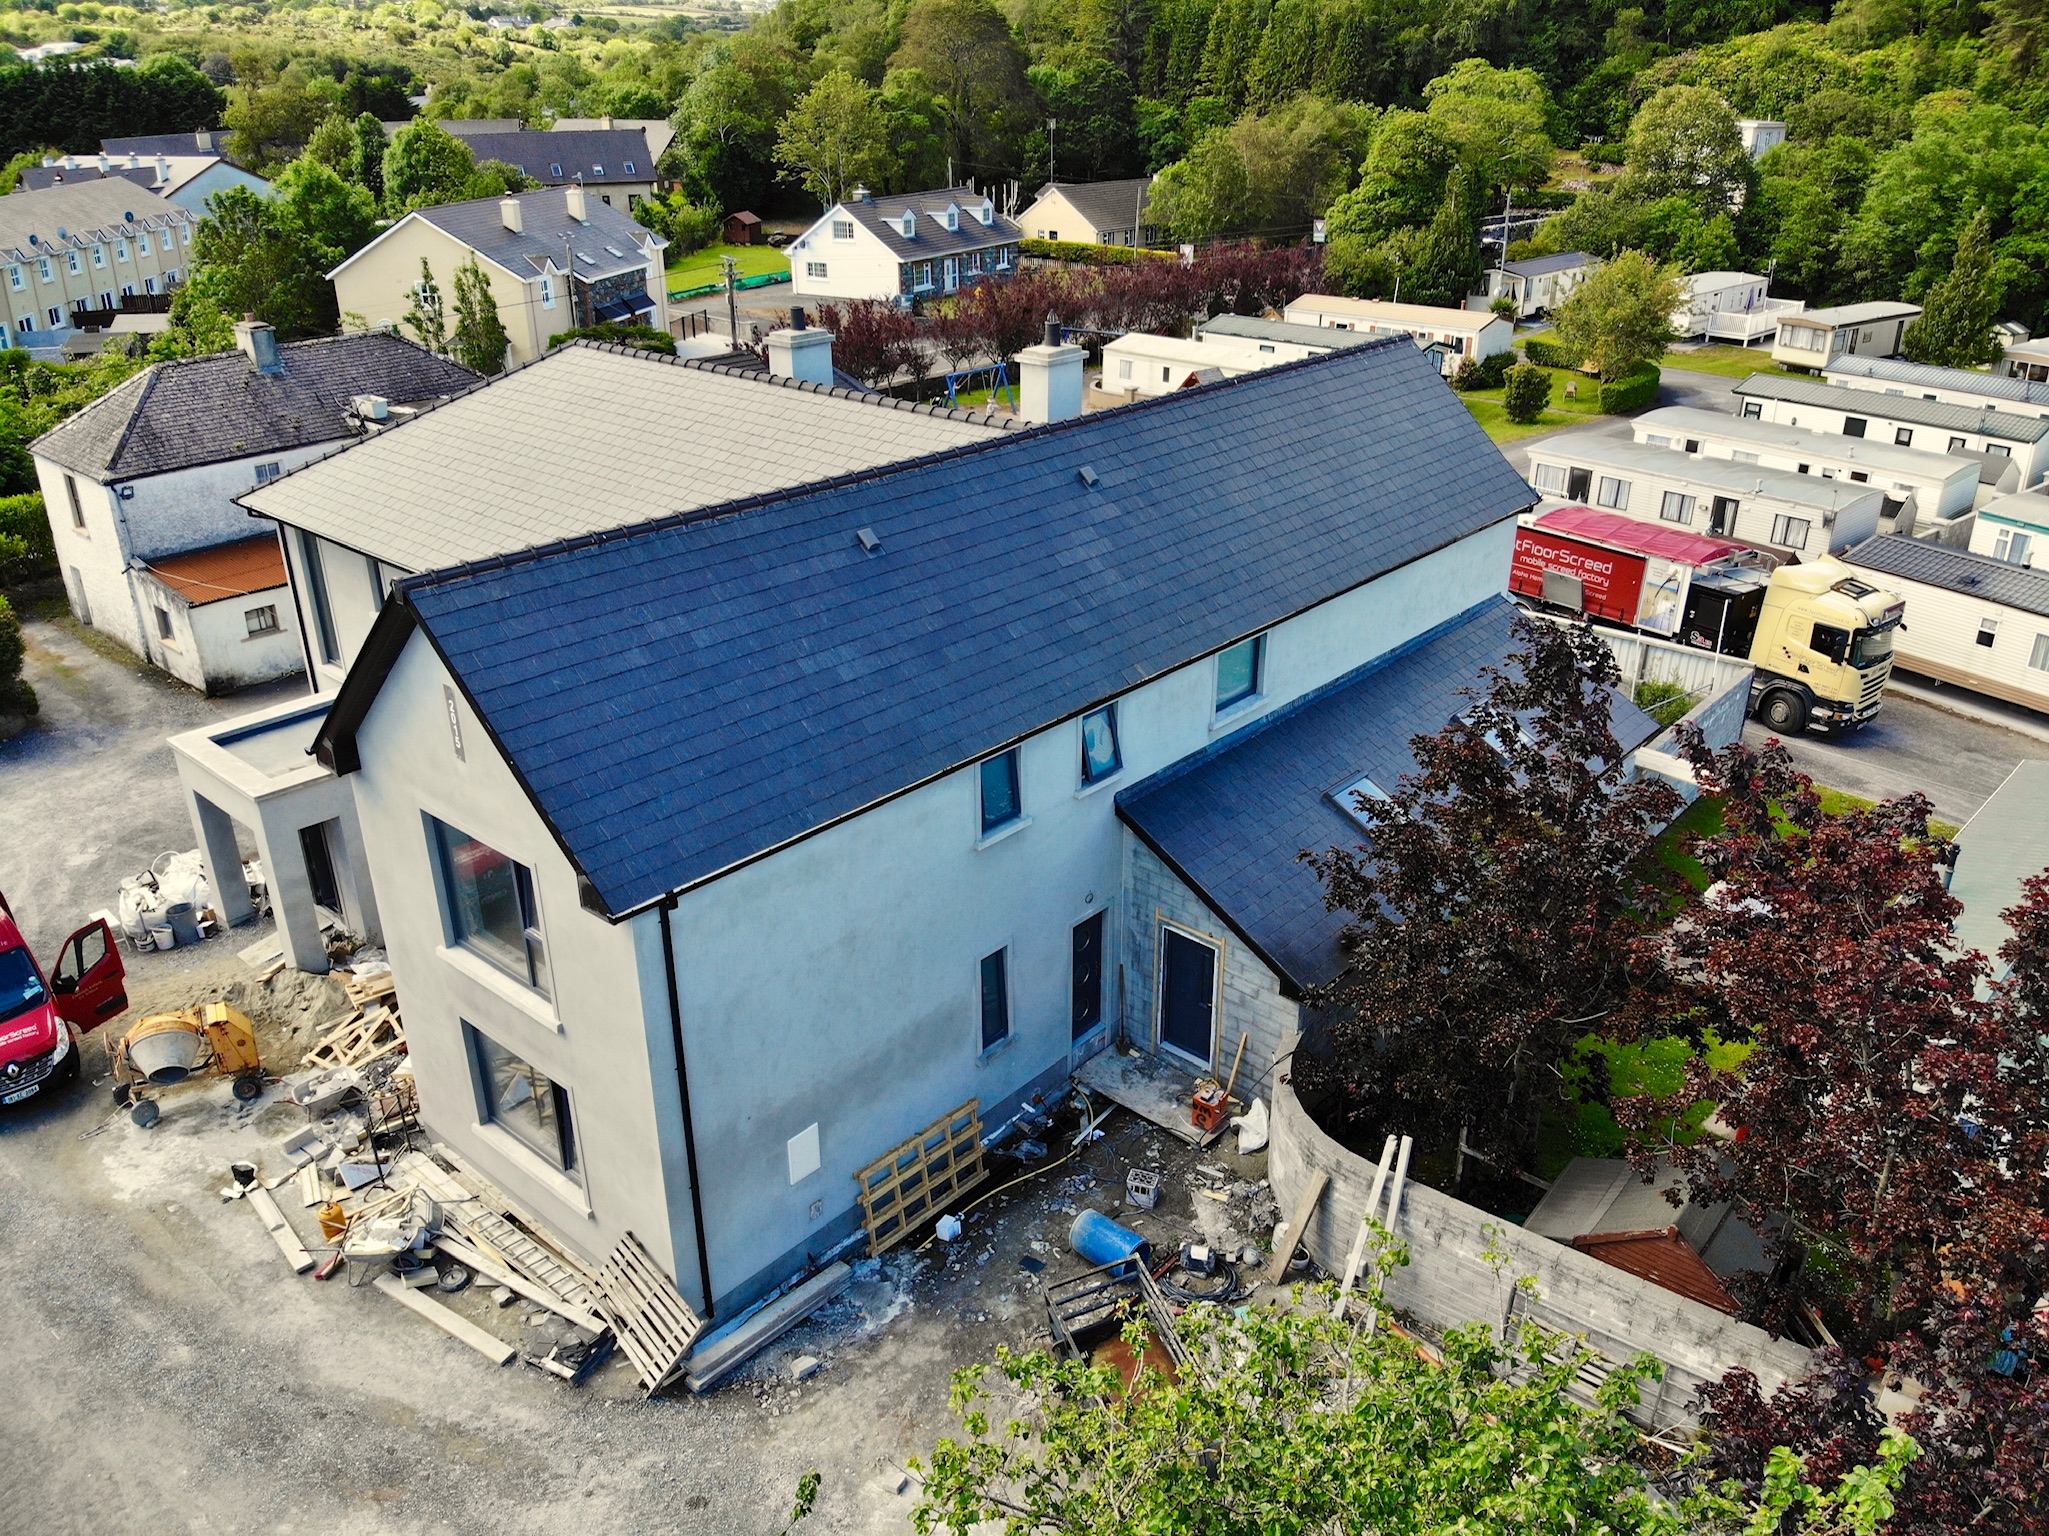 https://www.fastfloorscreed.ie/wp-content/uploads/2019/06/Mobile-Screed-Factory_screed-pour-OConnors-Holiday-Home-Park-Glenbeigh.jpg